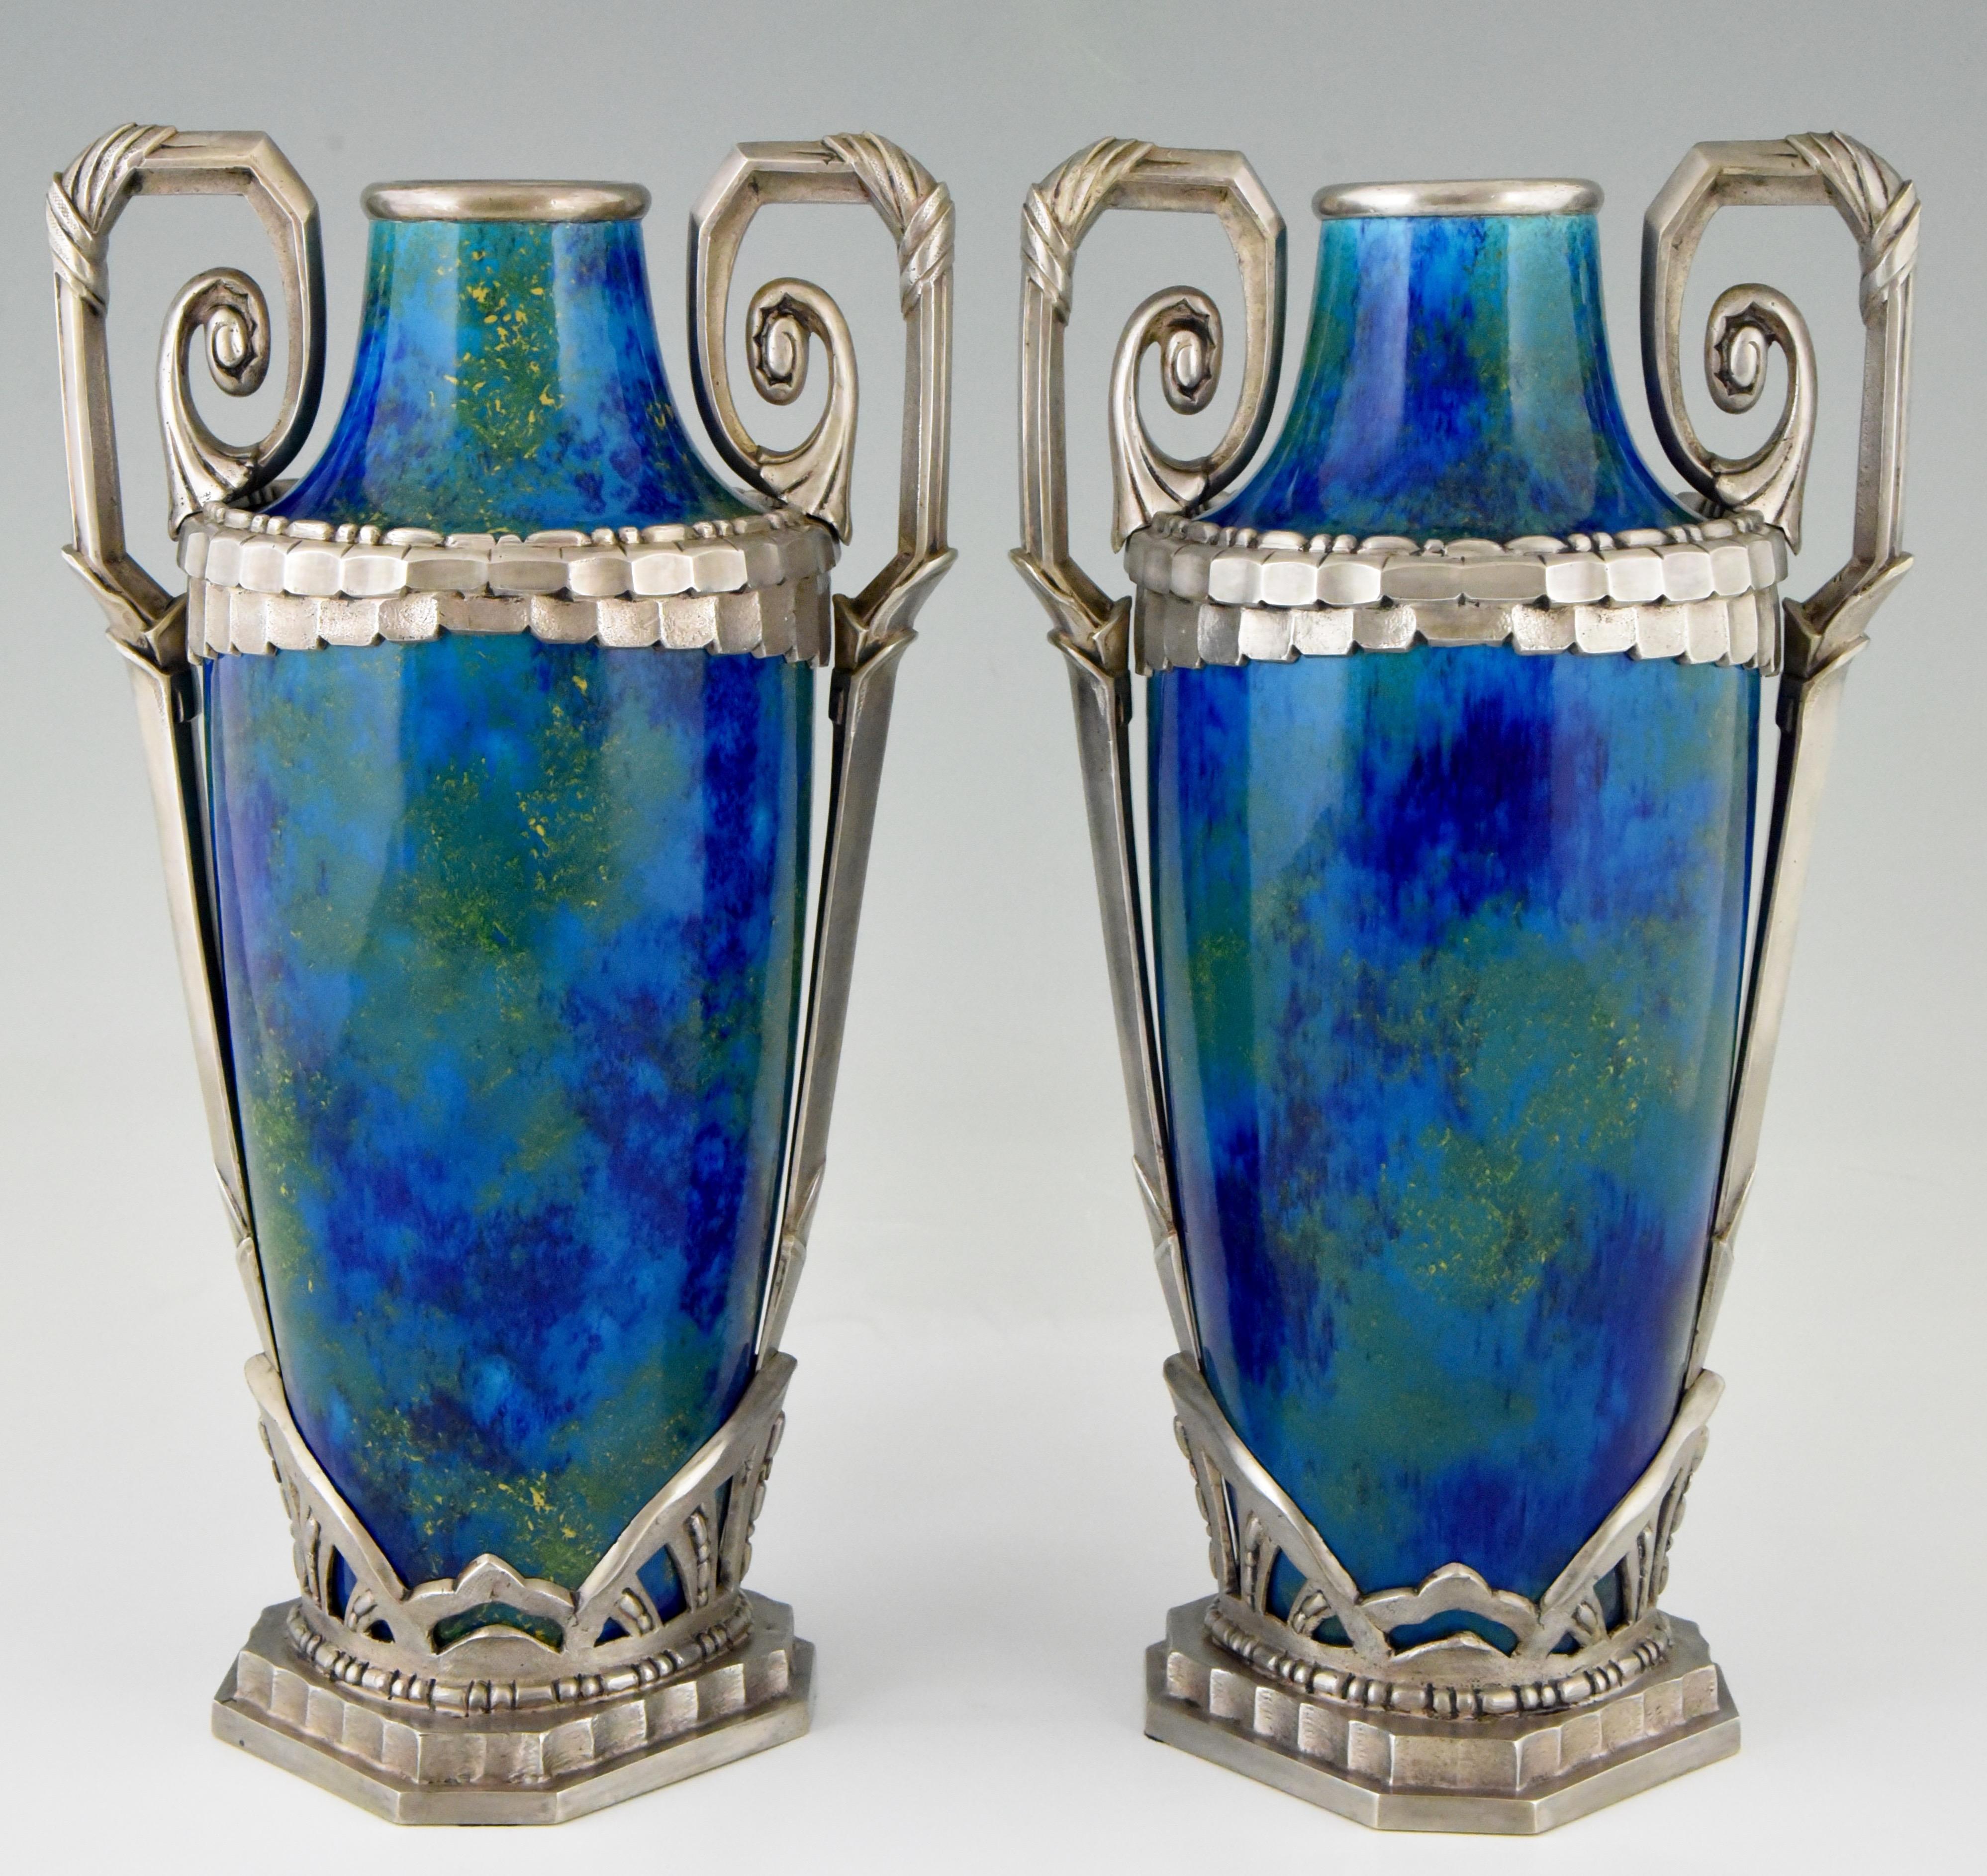 A pair of French Art Deco ceramic vases with “blue flambé” glaze and silvered bronze mounts.
There are gold specks in the intense colored green/blue glaze.
Designed by Paul Milet (1870-1950) for Sèvres, France, 1920. 

Literature:
The